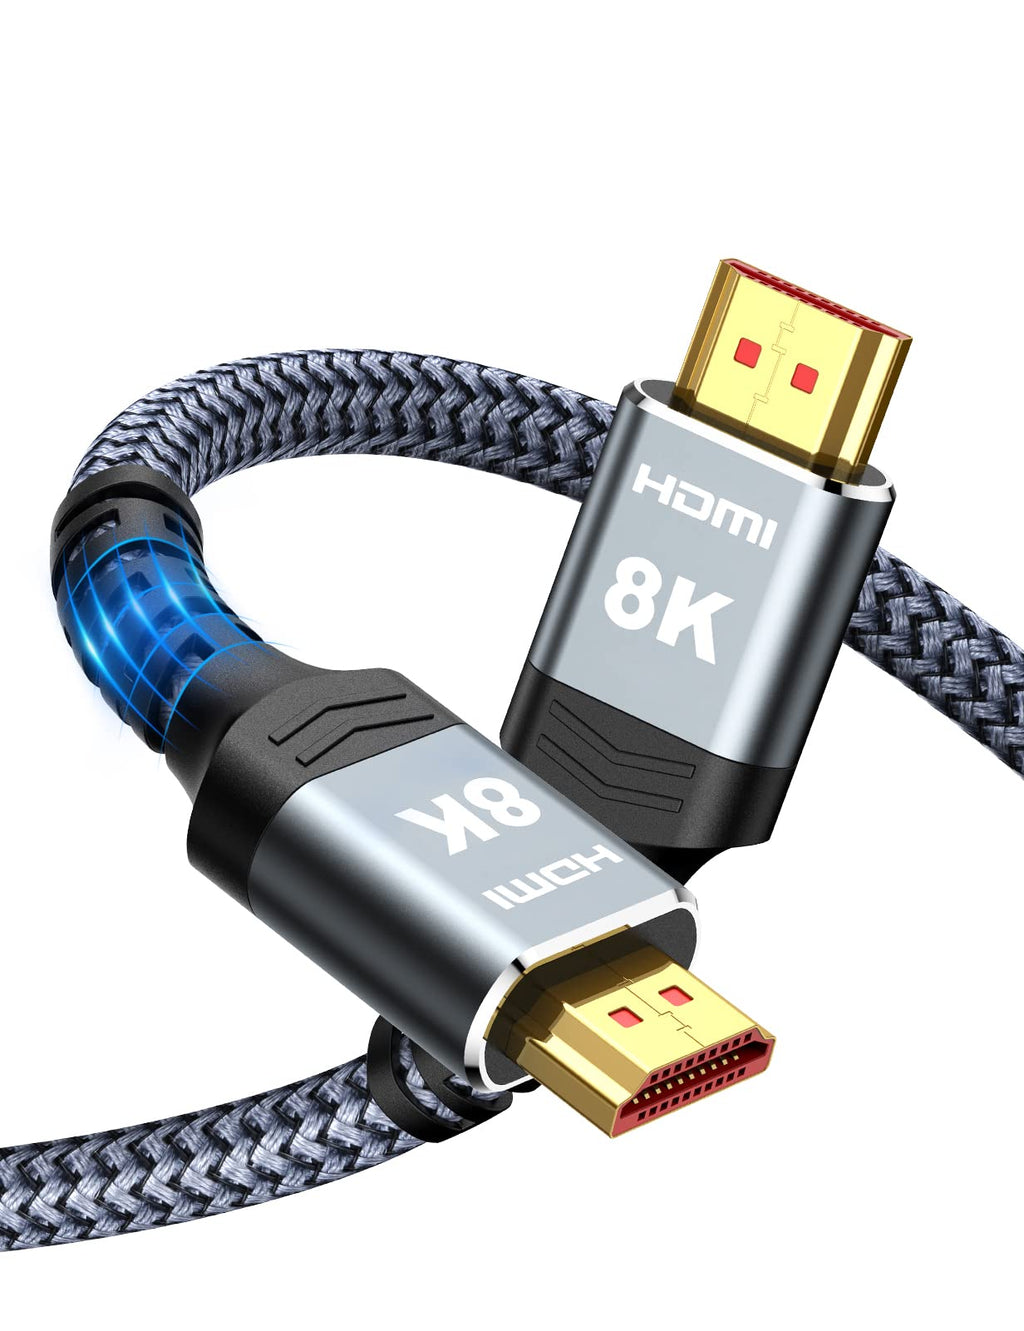  [AUSTRALIA] - 8K HDMI Cable 2.1 48Gbps 6.6FT/2M, Highwings High Speed HDMI Braided Cord-4K@120Hz 8K@60Hz, DTS:X, HDCP 2.2 & 2.3, HDR 10 Compatible with Roku TV/PS5/HDTV/Blu-ray 6.6 feet Grey